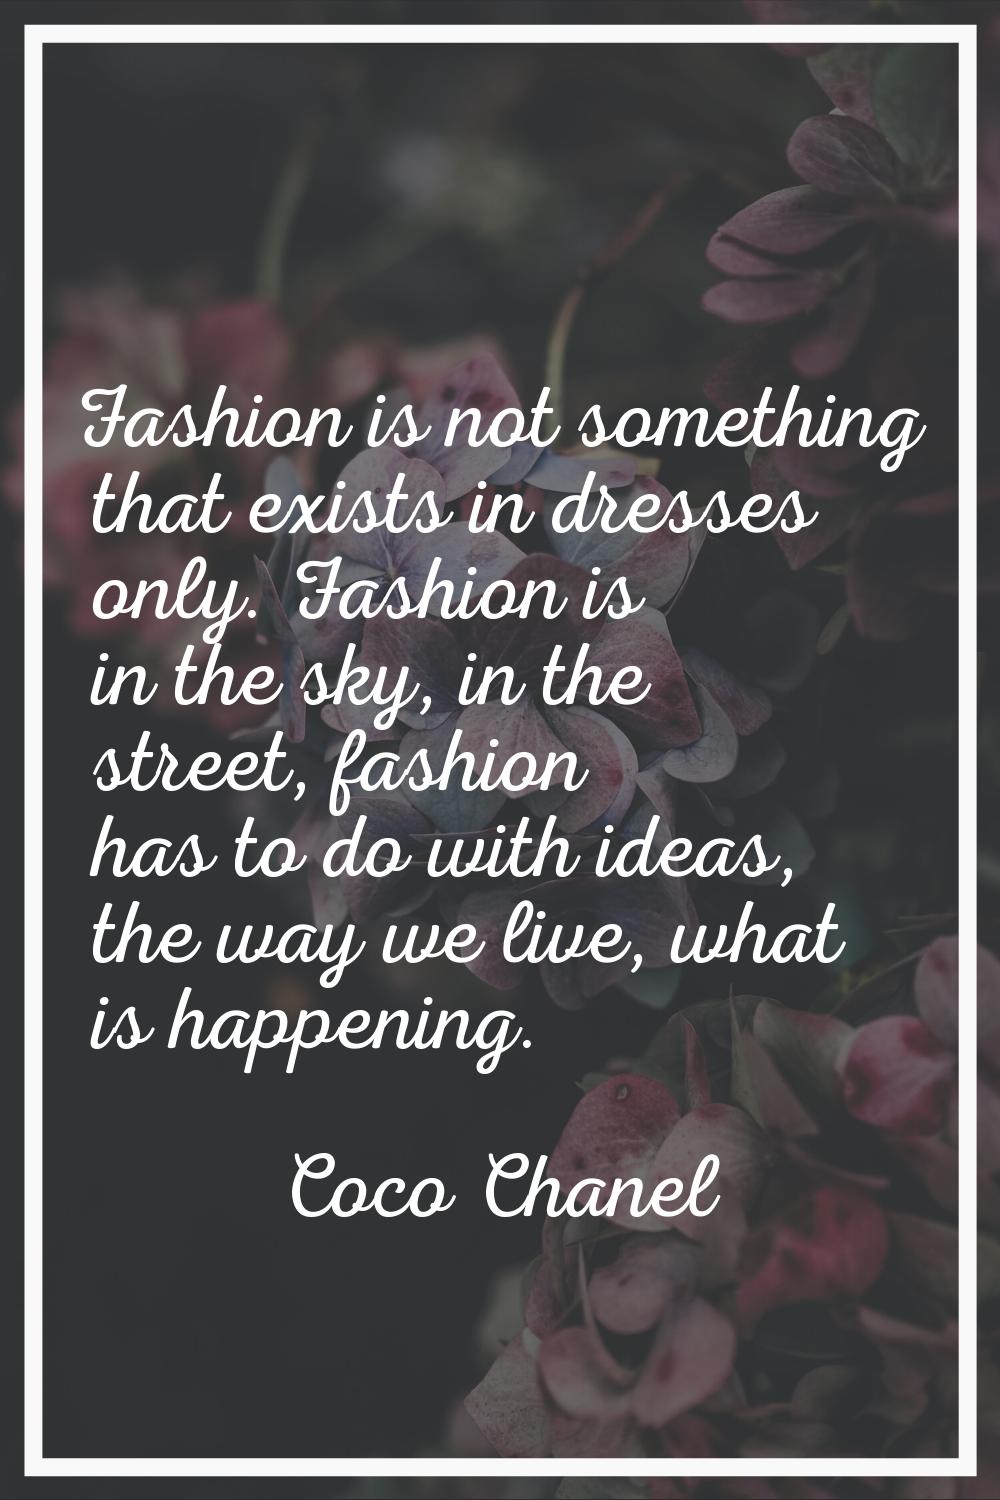 Fashion is not something that exists in dresses only. Fashion is in the sky, in the street, fashion